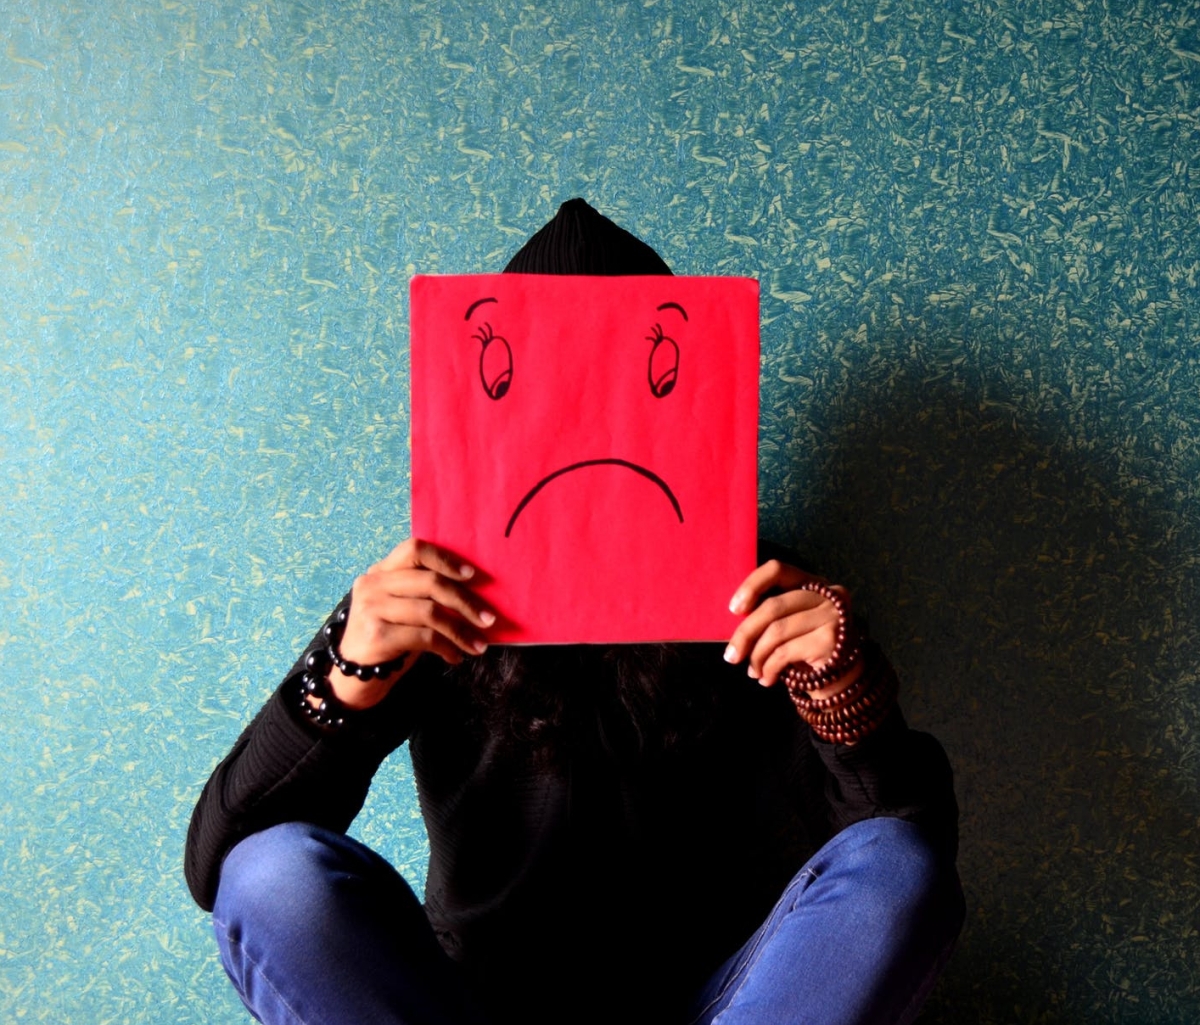 A picture of a person sitting cross-legged up against a wall. The person is holding a red square of paper up to cover their face; there is a frowning face with downcast eyes drawn on the paper.